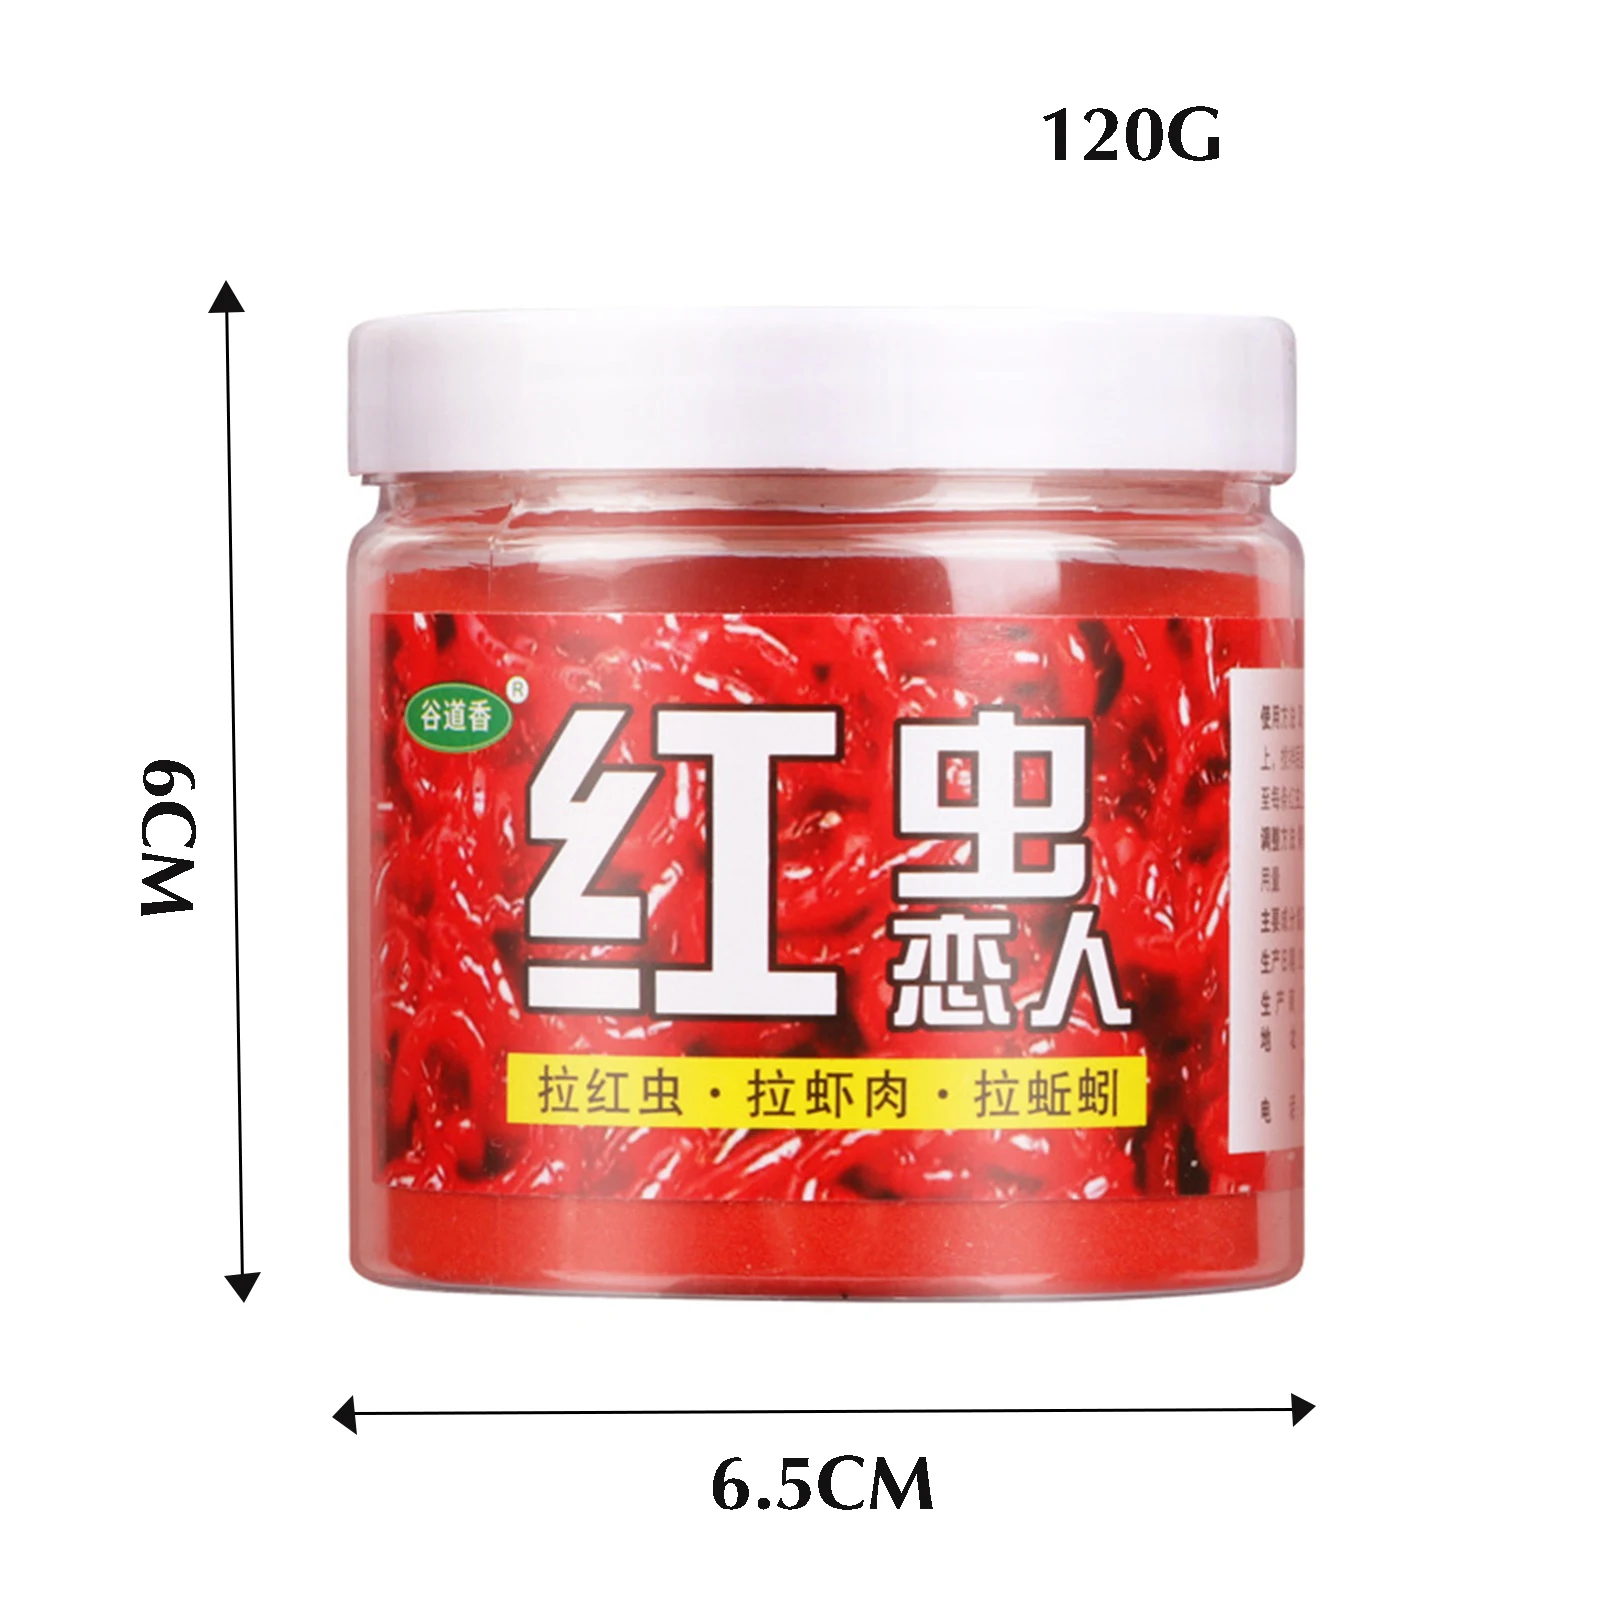 Gudaoxiang Red Worm Lover Bait Additive Fishing Lure Carp Crucian Carp Bait  Red Worm Powder Meat Fishing Lure